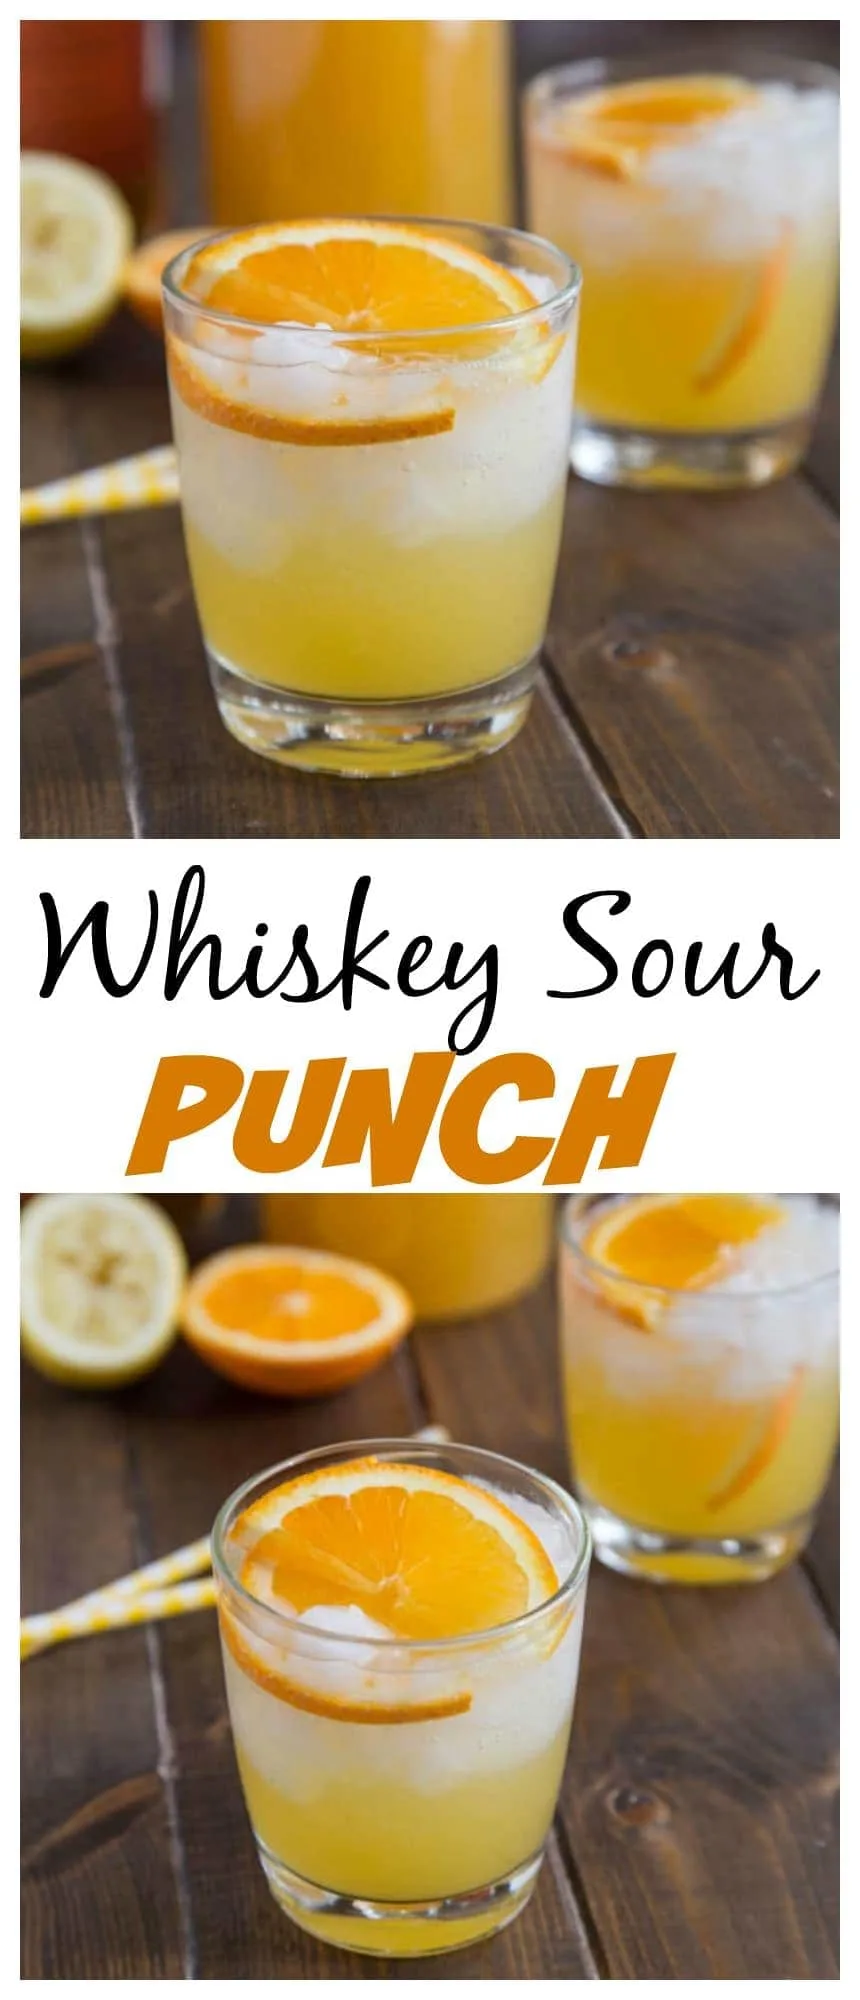 Whiskey Sour Punch - orange juice, lemon juice and bourbon some together for a fizzy and fun punch. Great for get togethers, and you can even make it ahead!